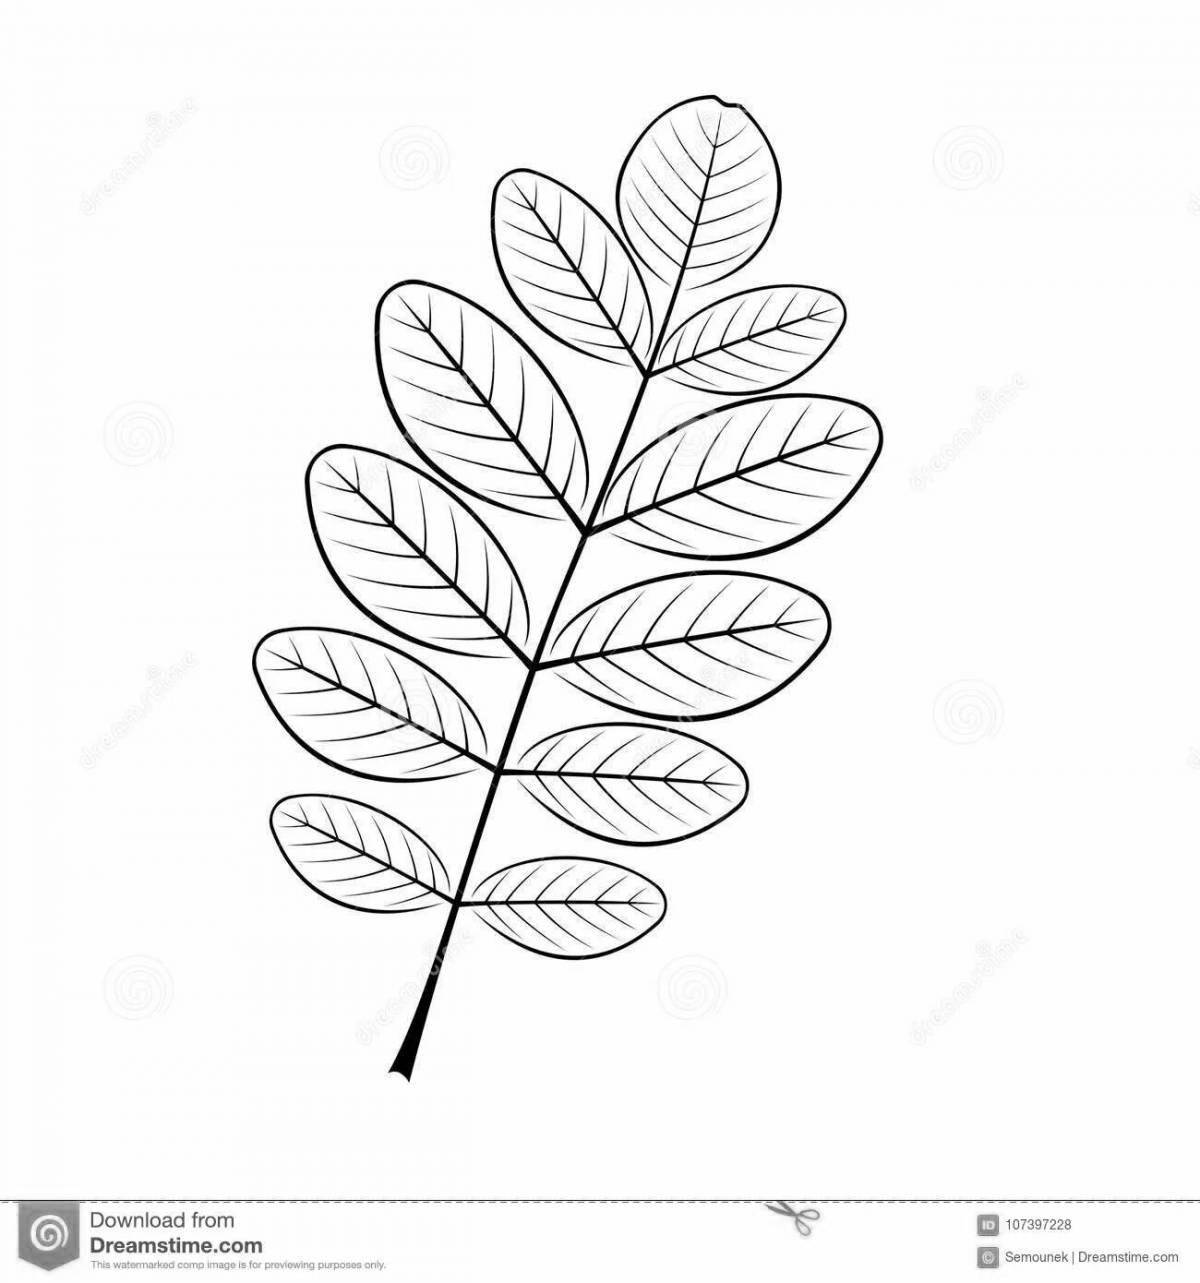 Welcoming rowan leaf coloring pages